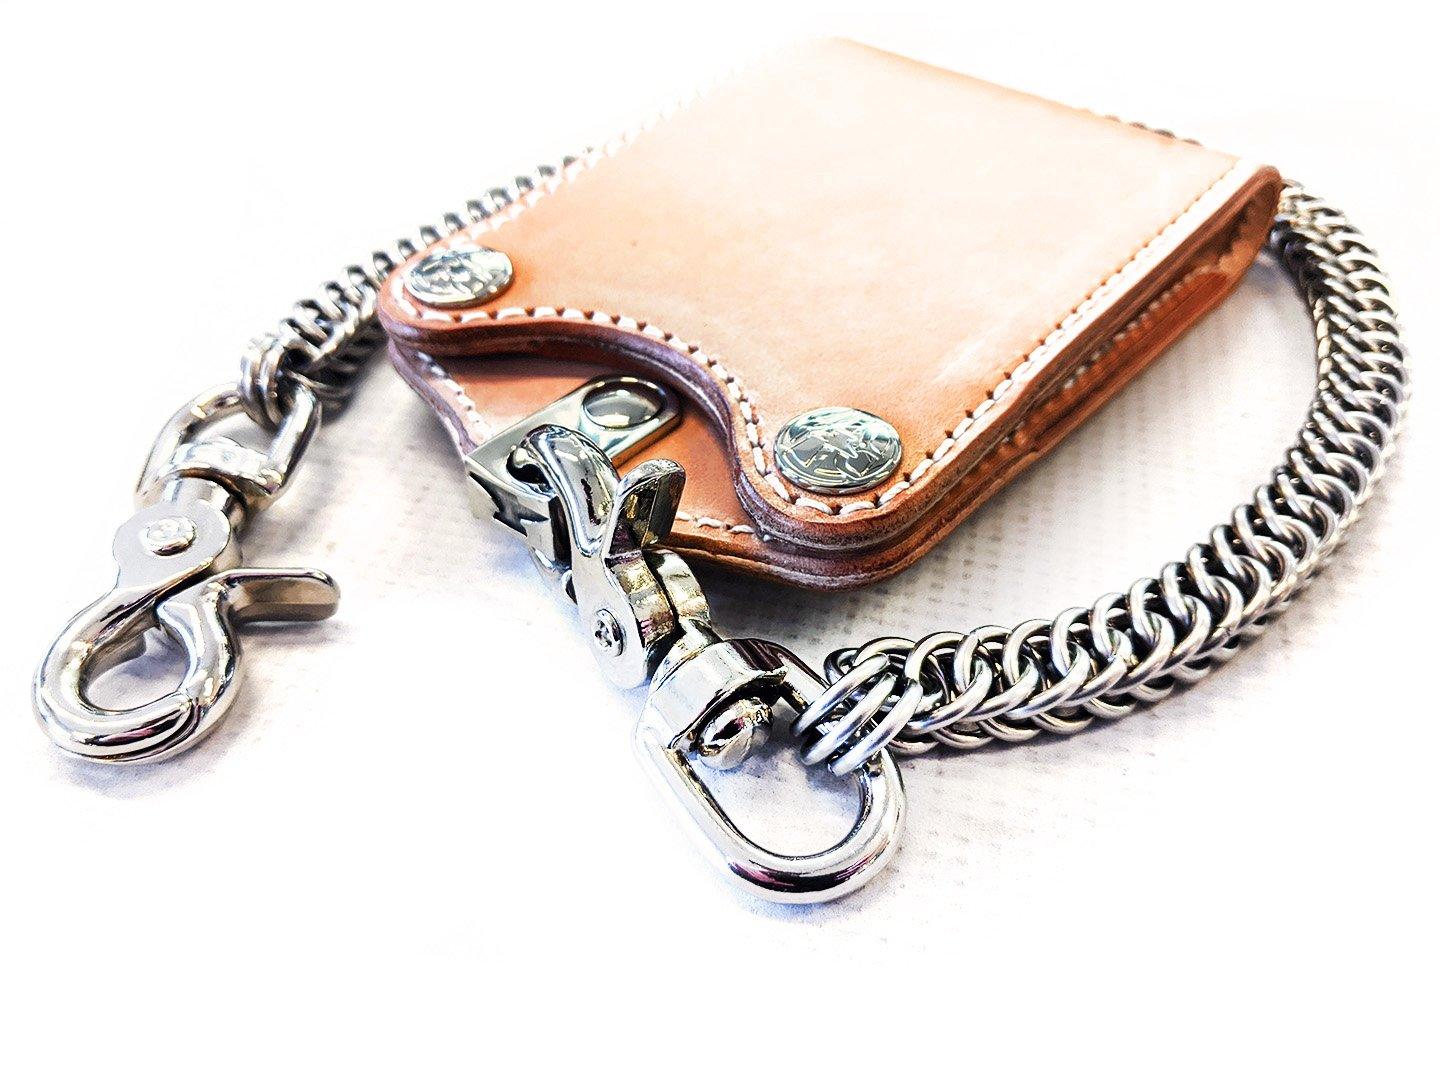 Cow Leather Key Chain Wallet, Genuine Leather Key Holder